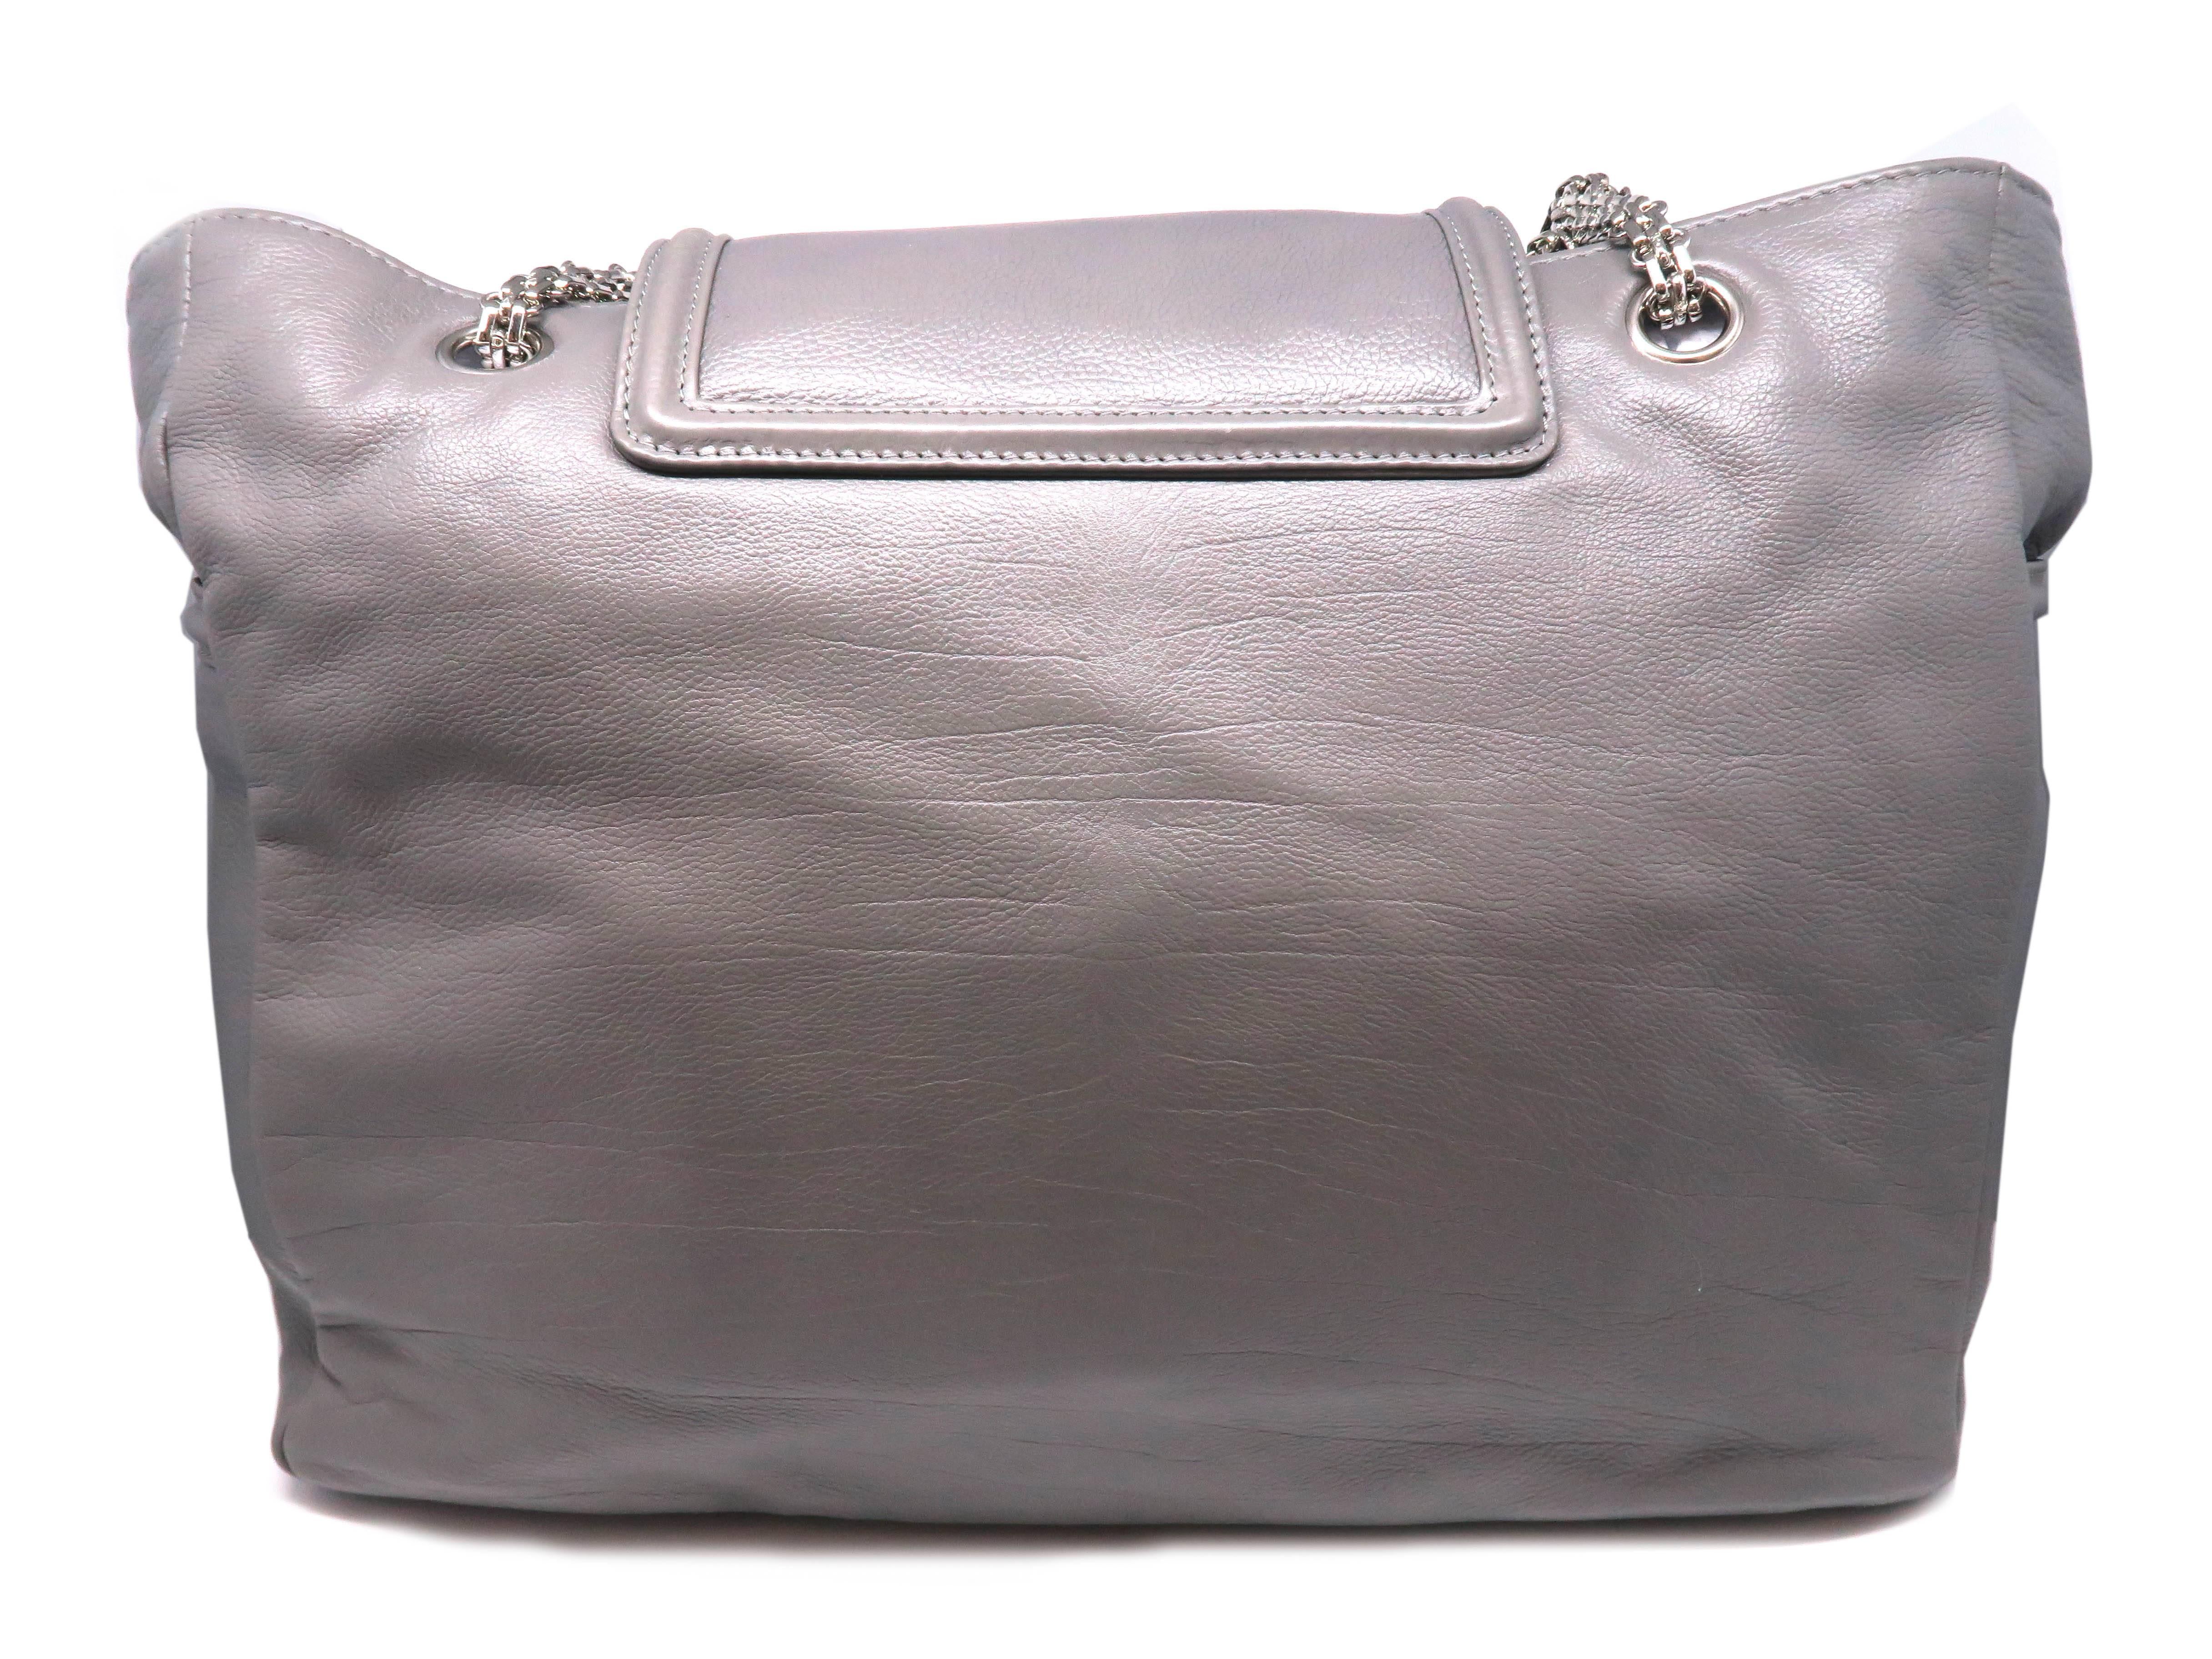 Chanel Grey Calfskin Leather Silver Metal Chain Shoulder Bag In Excellent Condition For Sale In Kowloon, HK